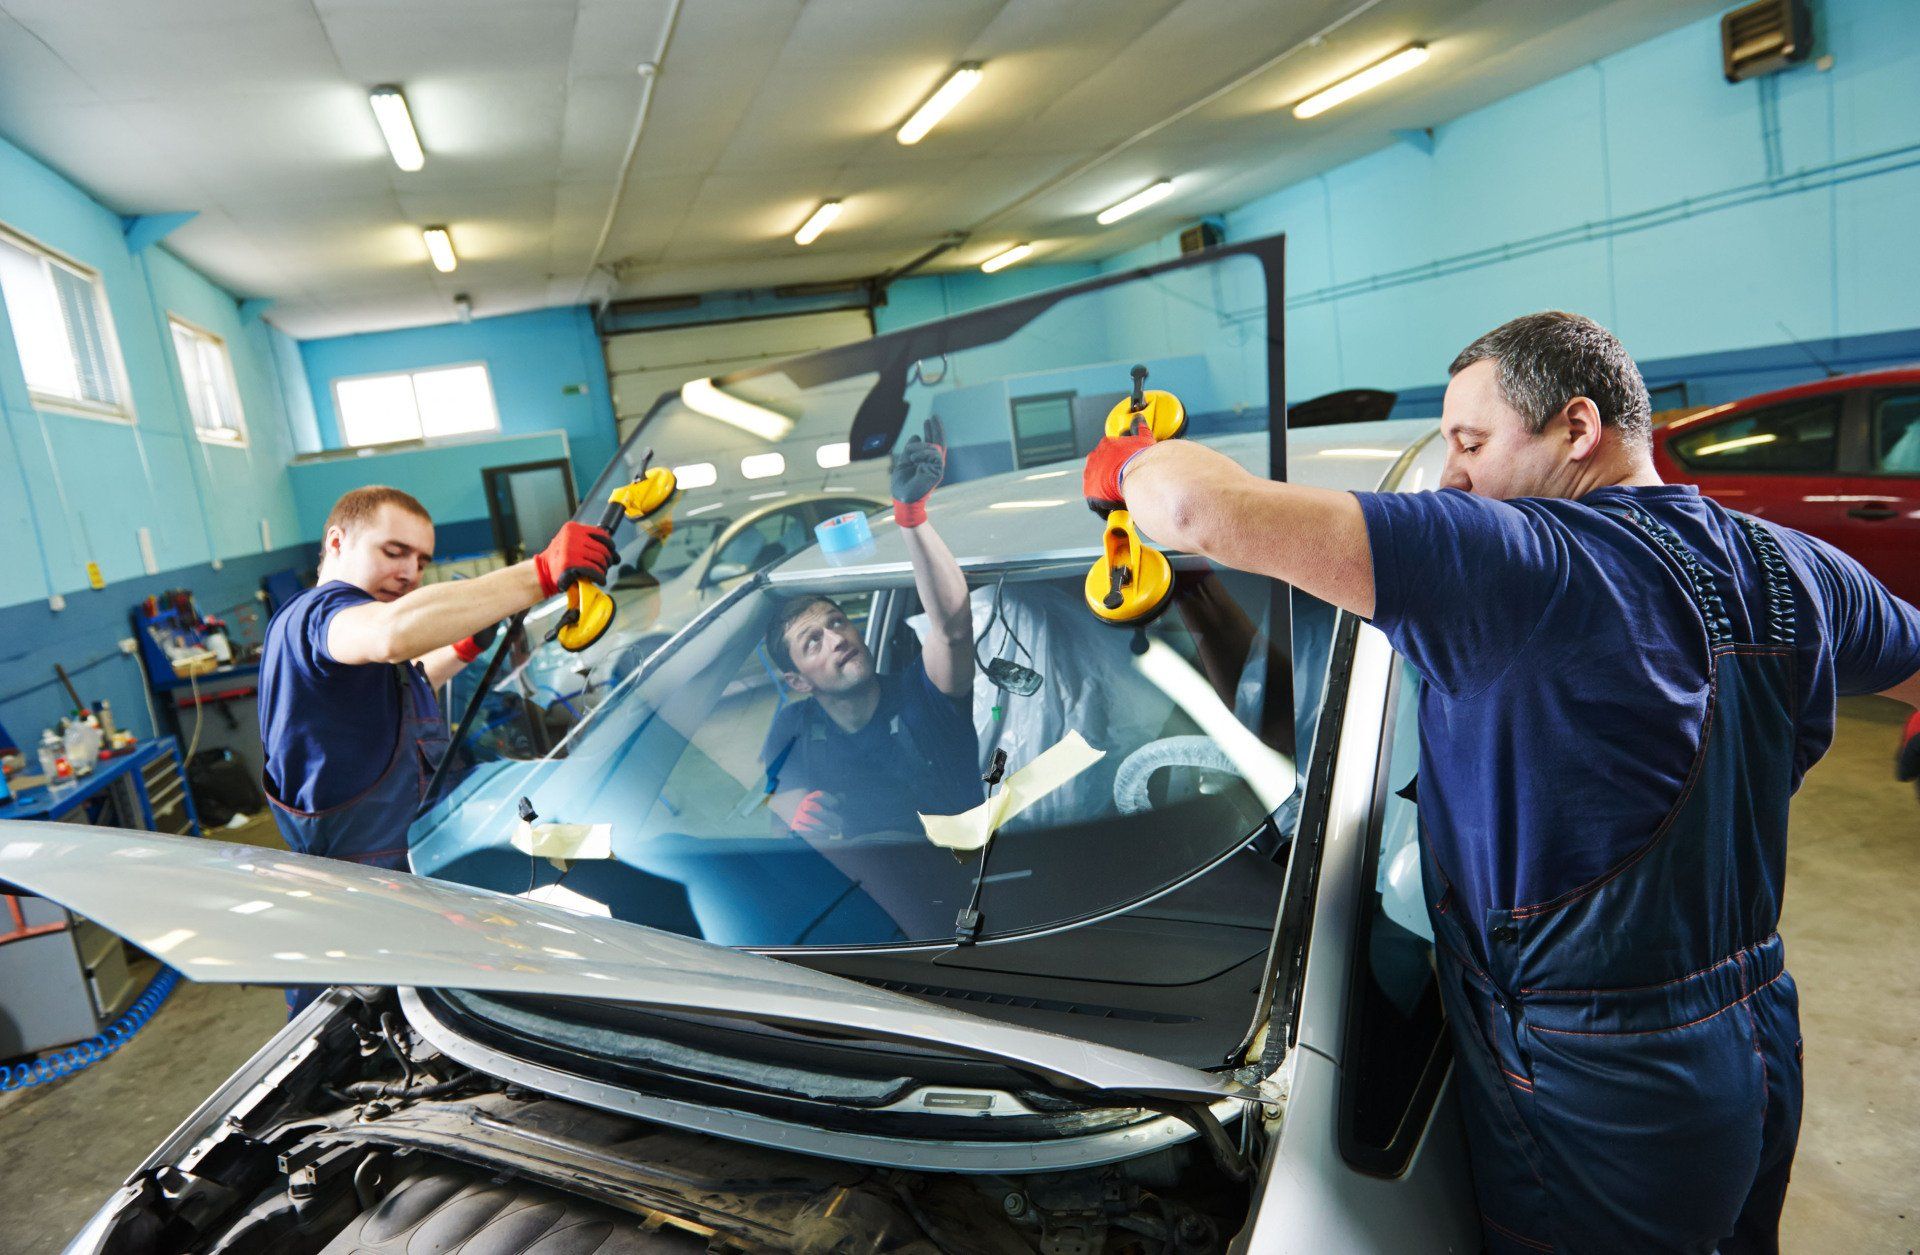 Automobile glaziers workers replacing windshield